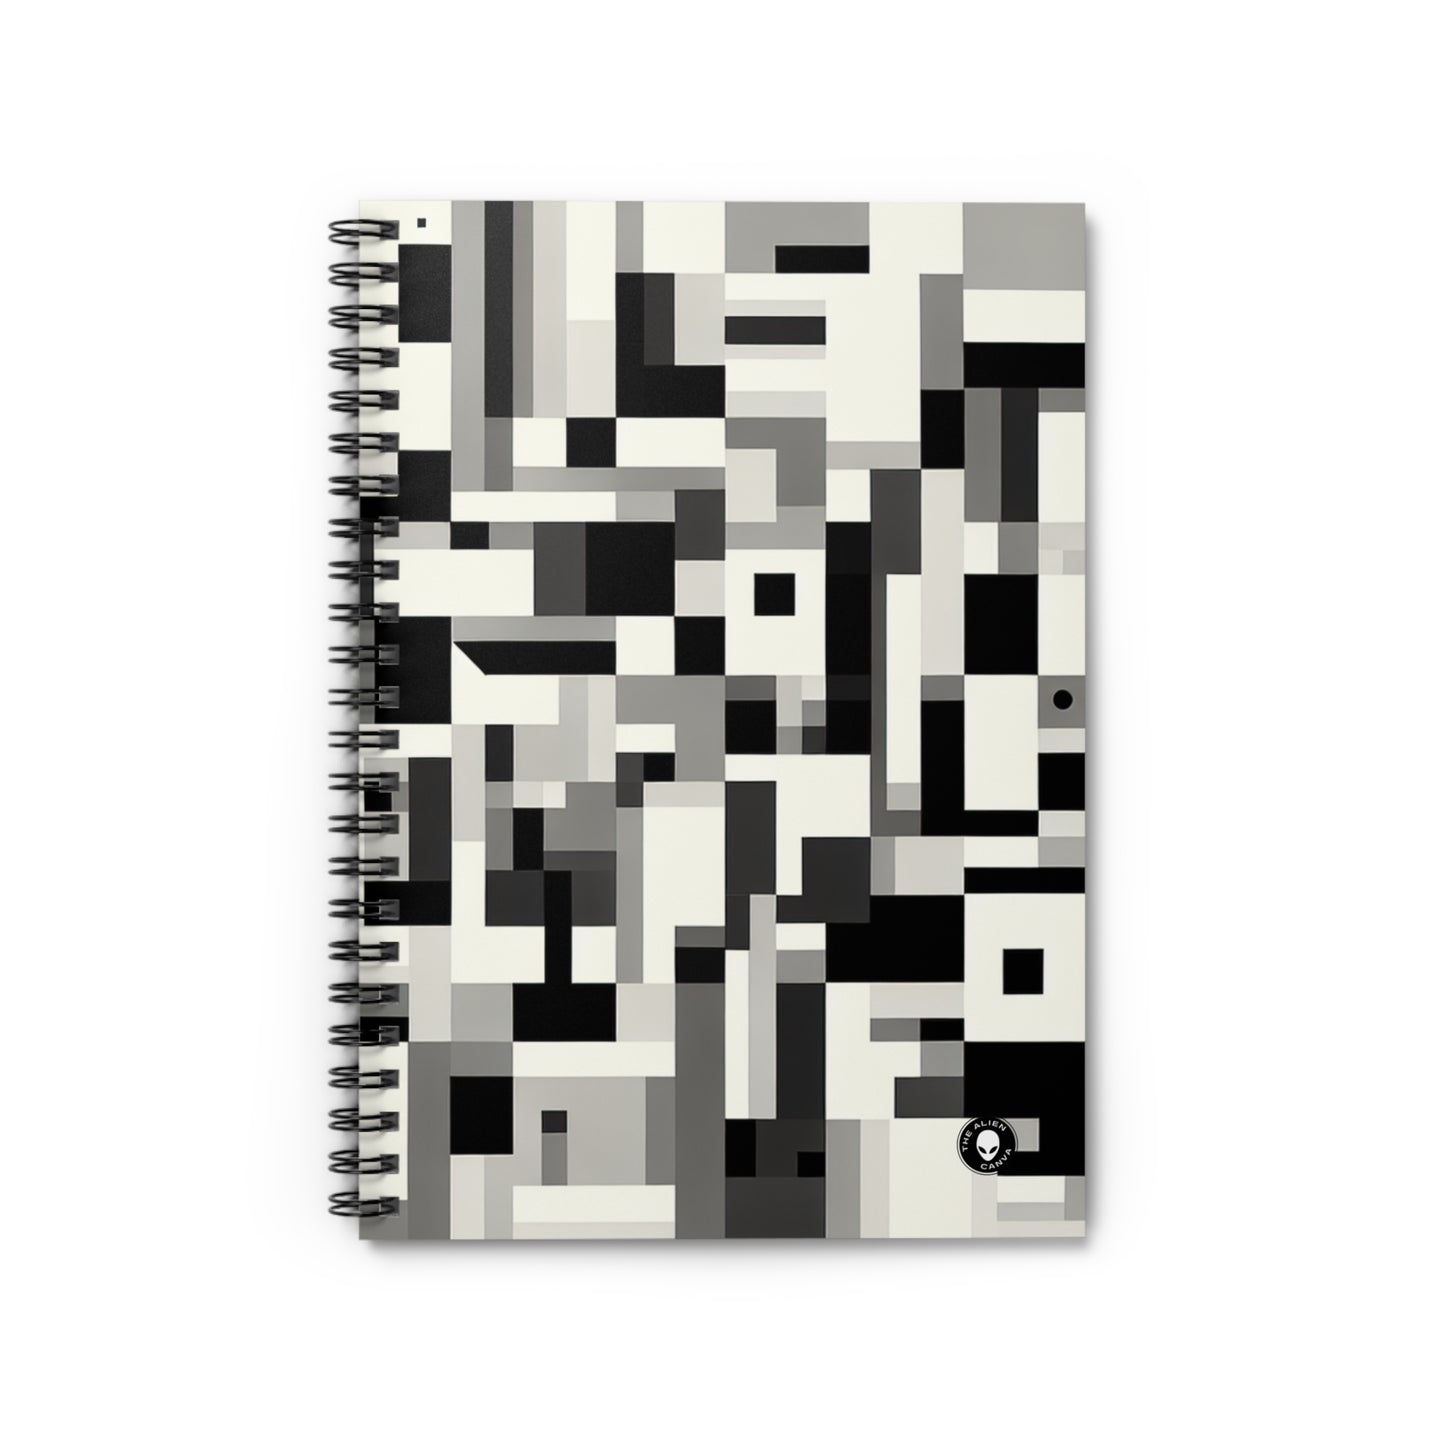 "Cityscape in Analytical Cubism" - The Alien Spiral Notebook (Ruled Line) Analytical Cubism